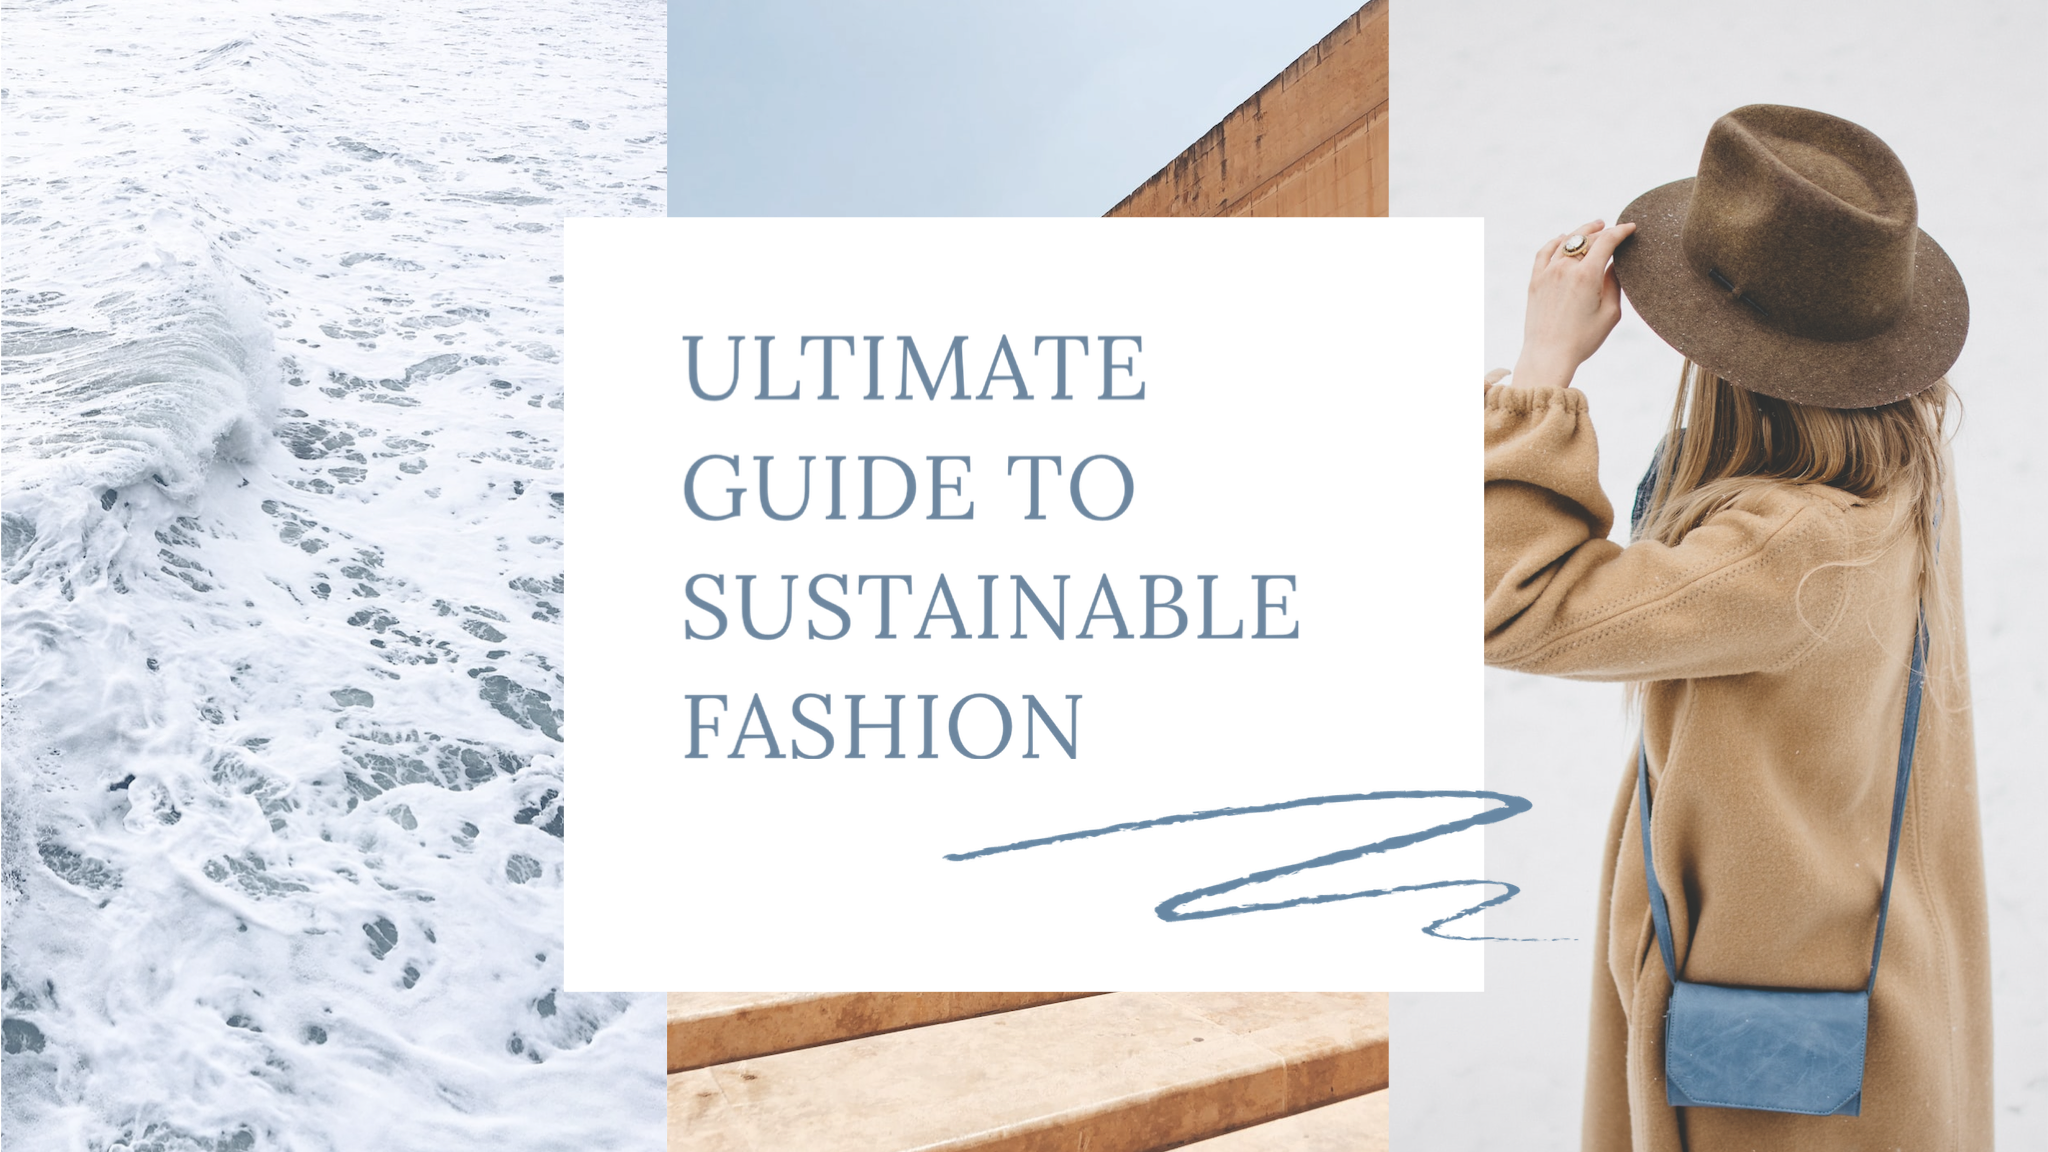 Ultimate guide to sustainable fashioncreative youtube thumbnail template